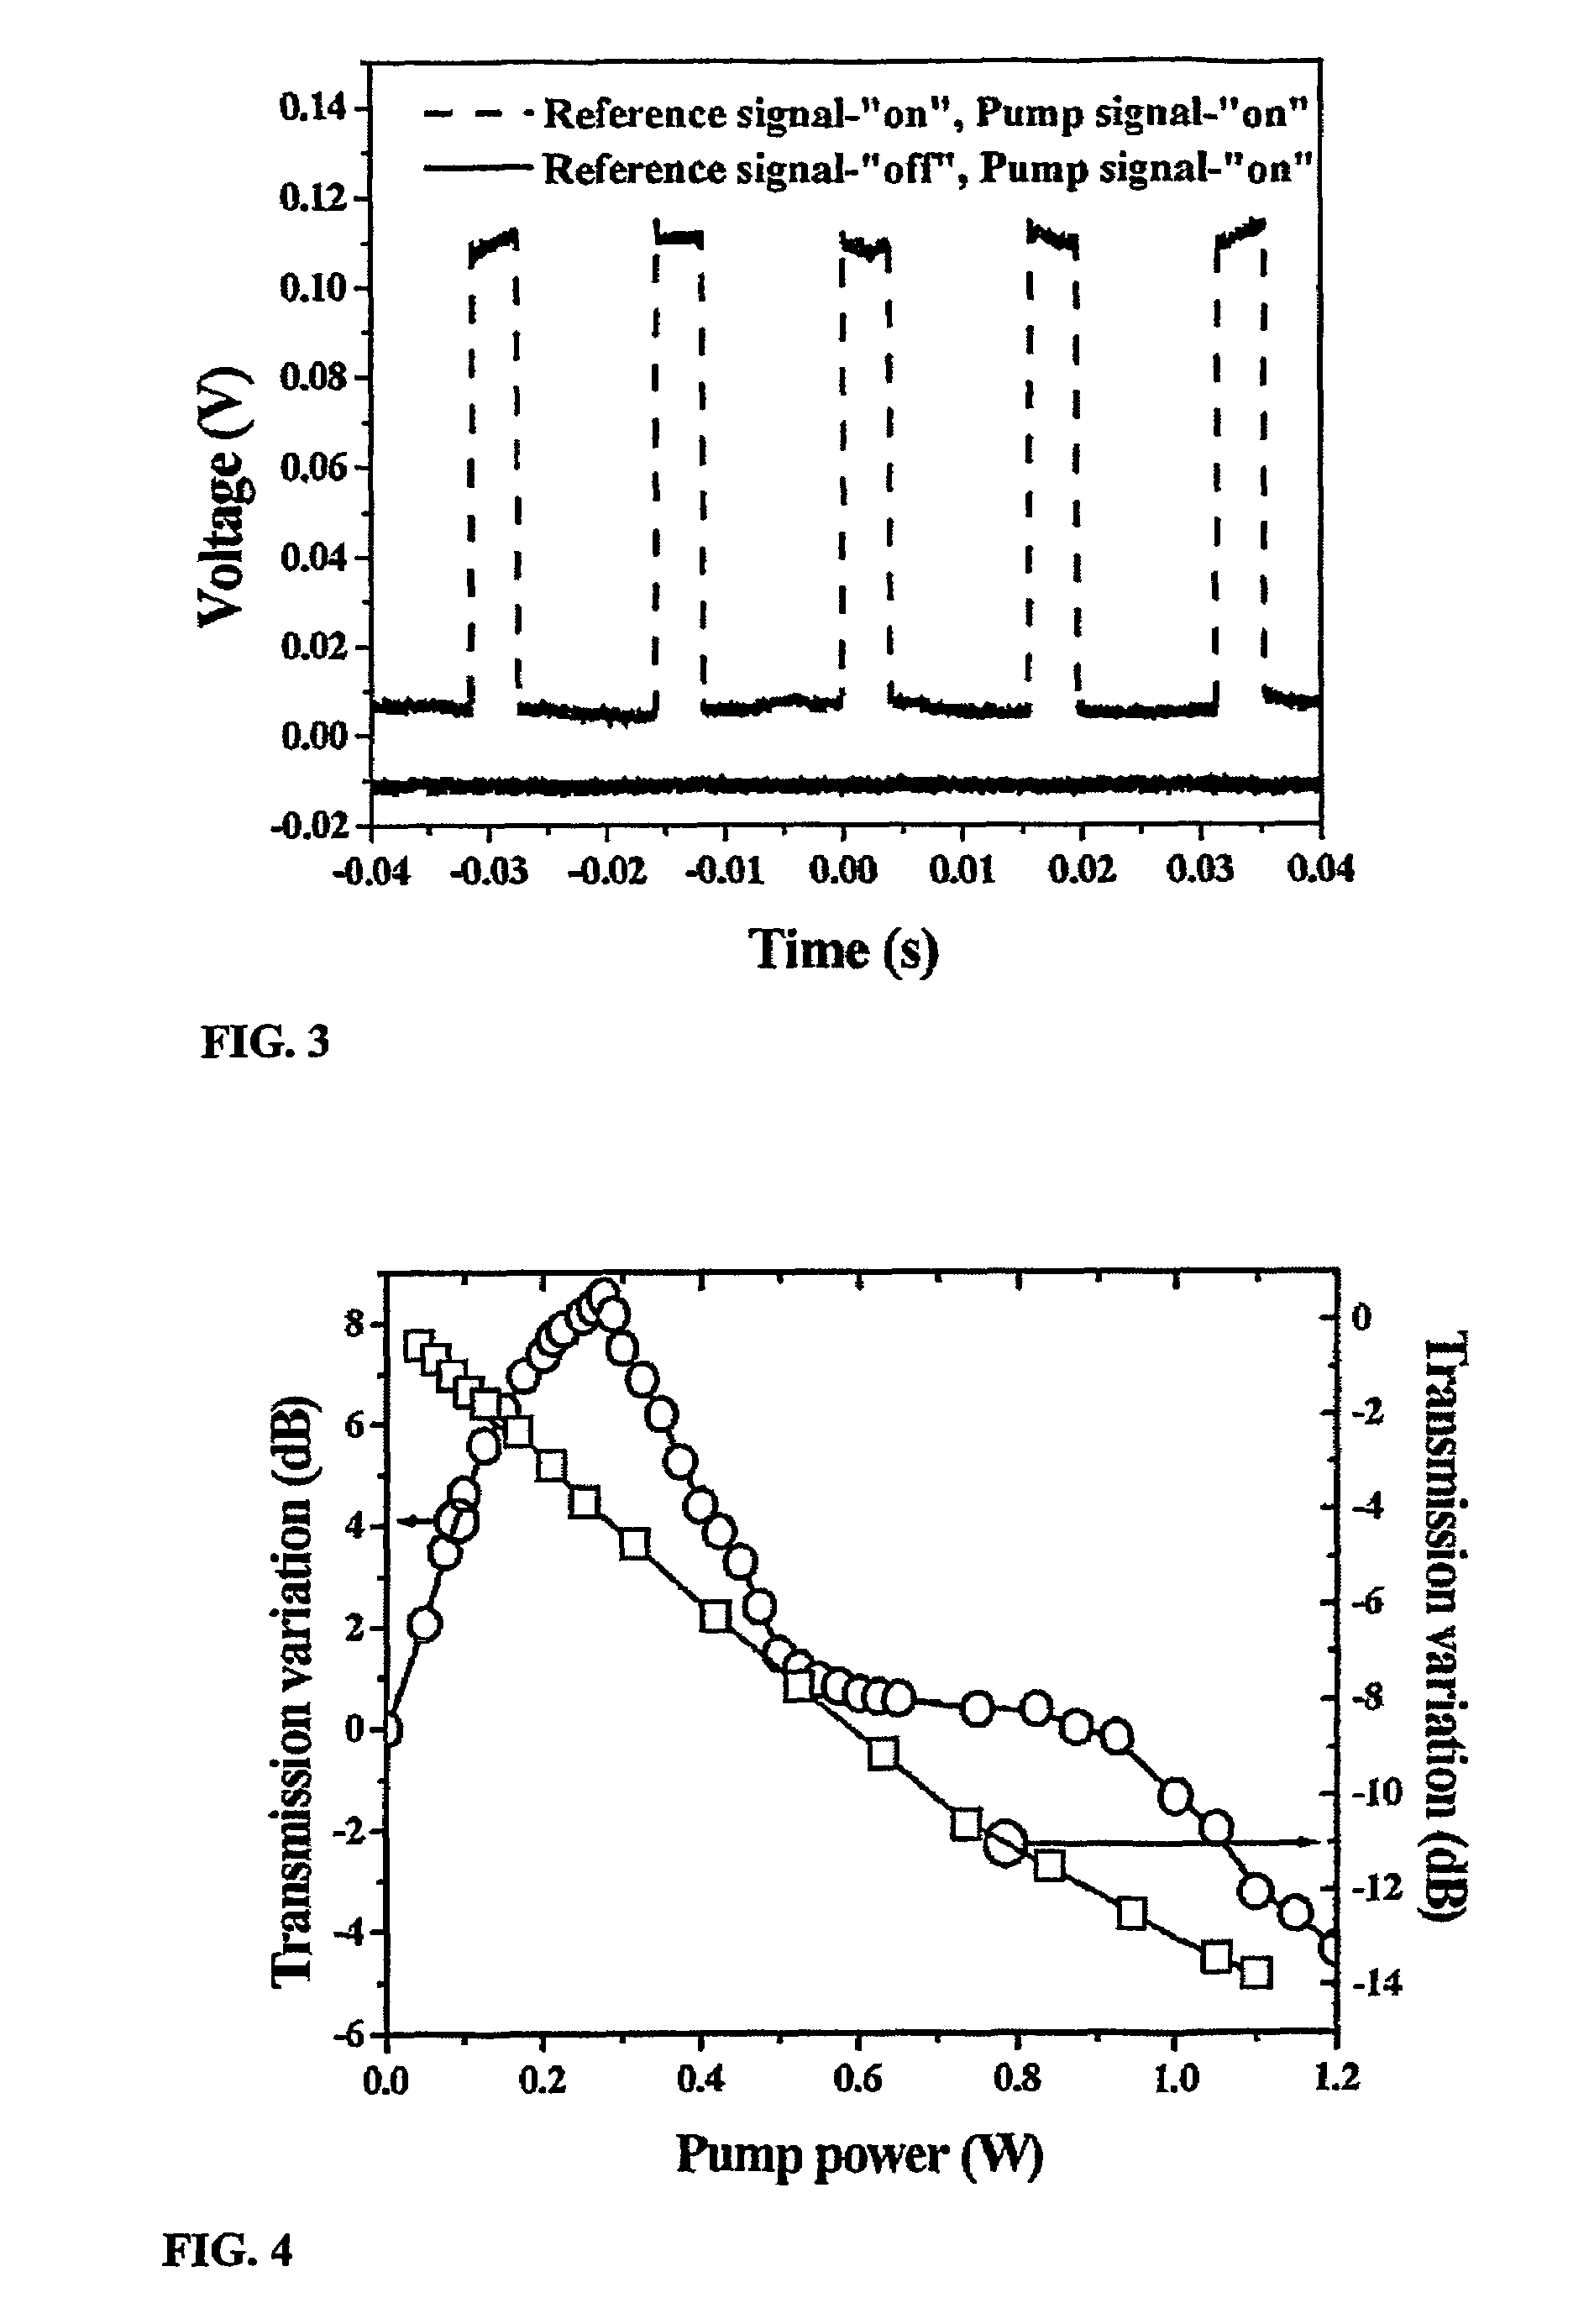 Apparatus and method for optical amplification in indirect-gap semiconductors